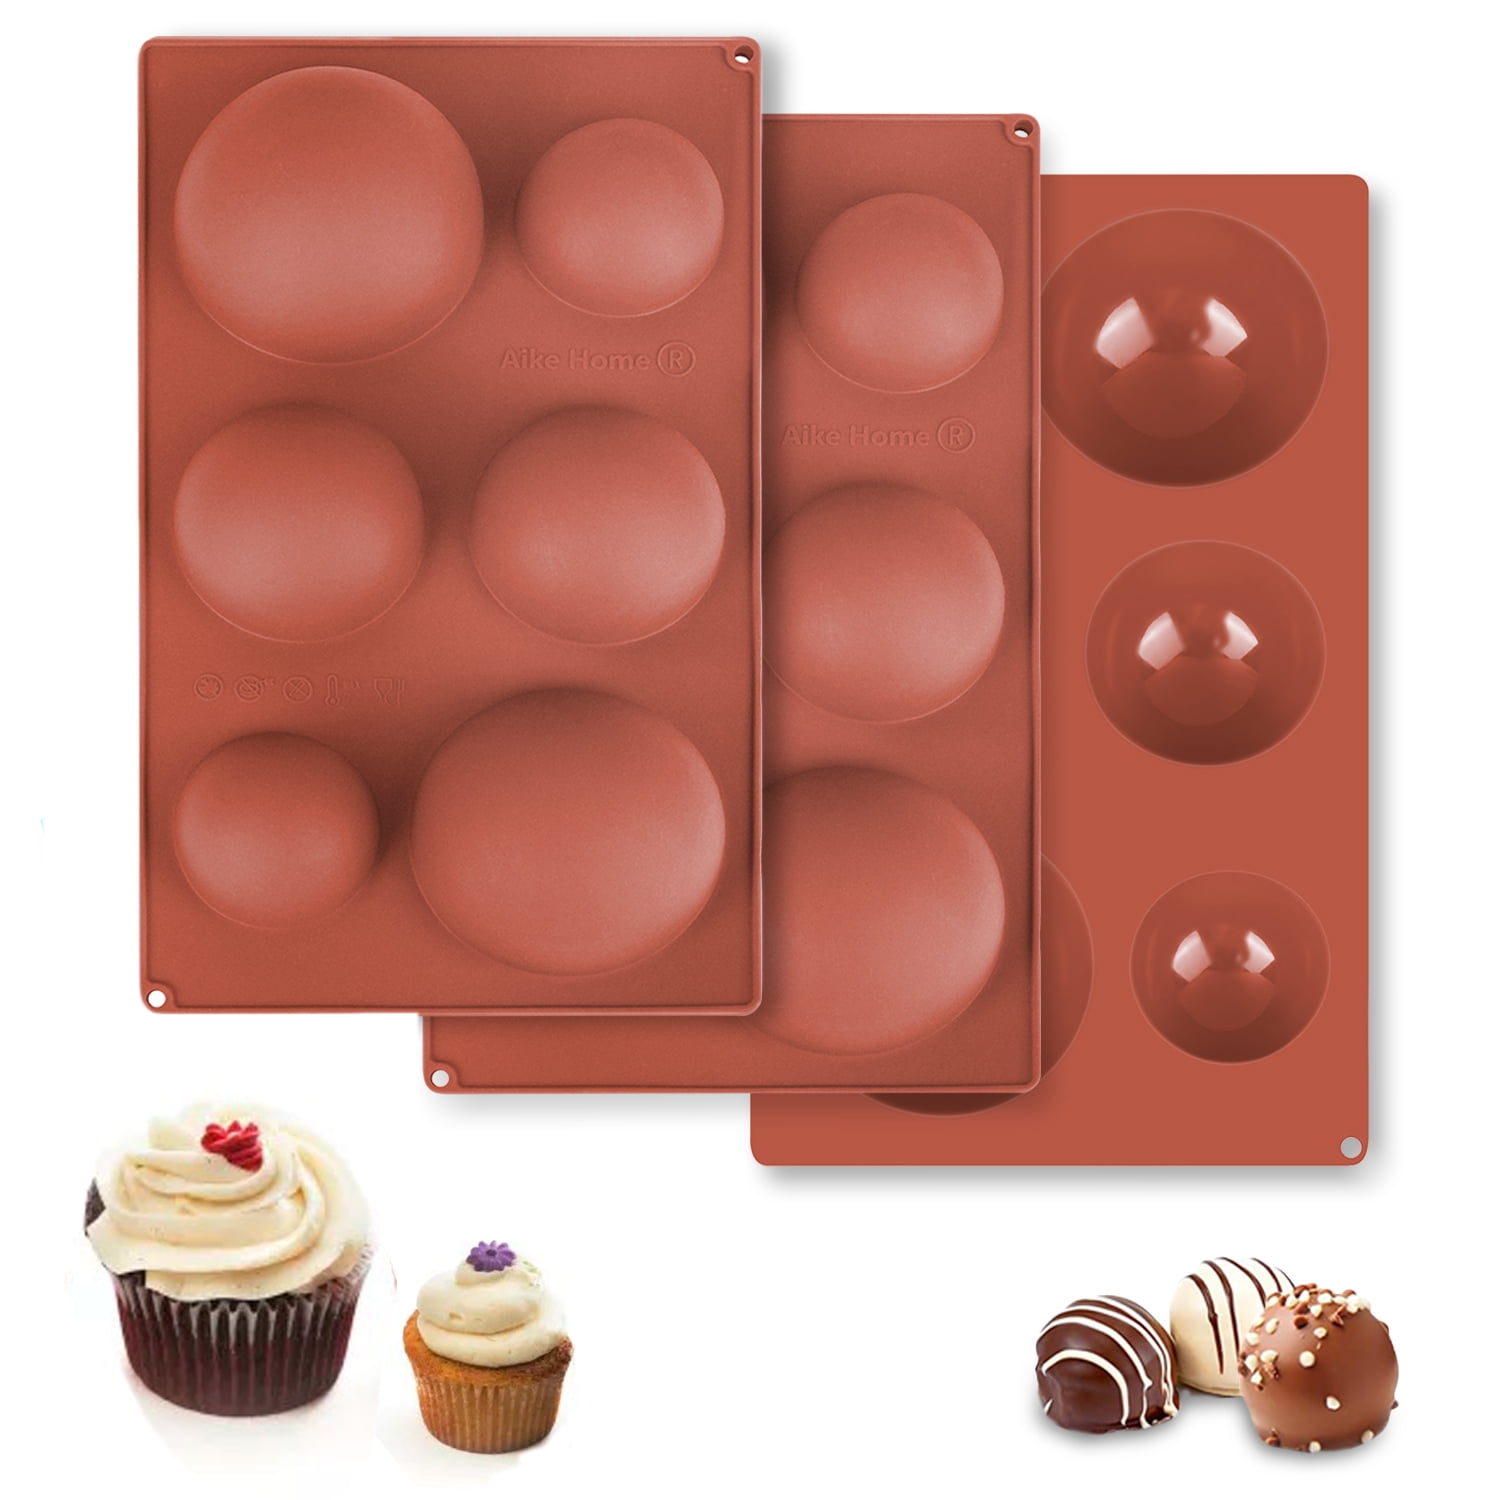 Details about   Silicone 15/24 Hole Semi-Sphere Round Mold Hot Chocolate Bomb Cake Baking Moulds 